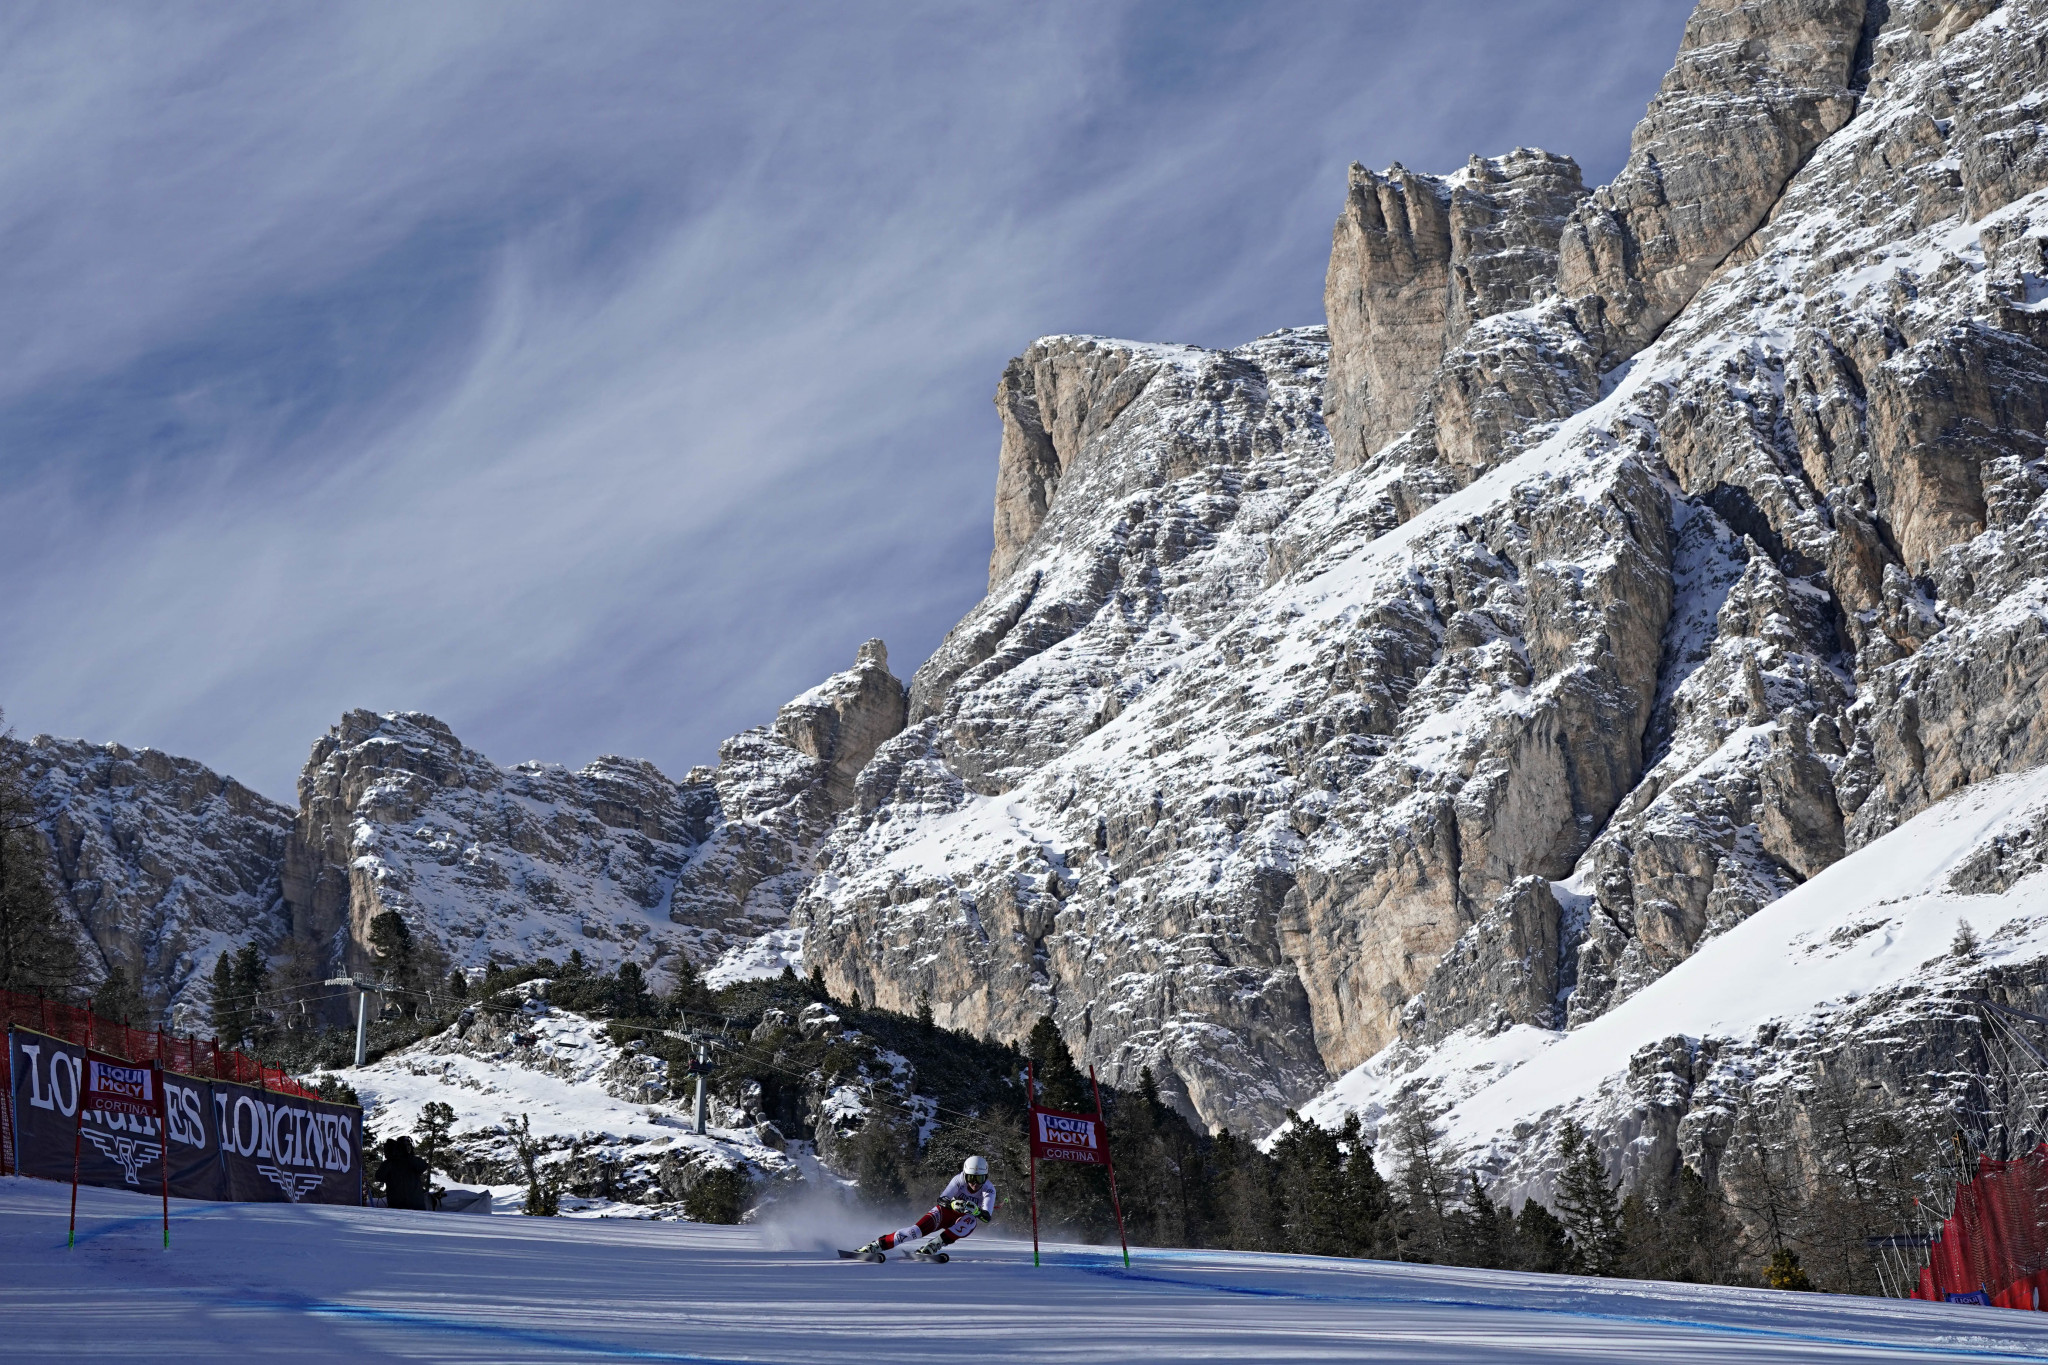 The first phase of the project will connect Cortina d’Ampezzo to the Cinque Torri area through Socrepes and Pocol ©Getty Images